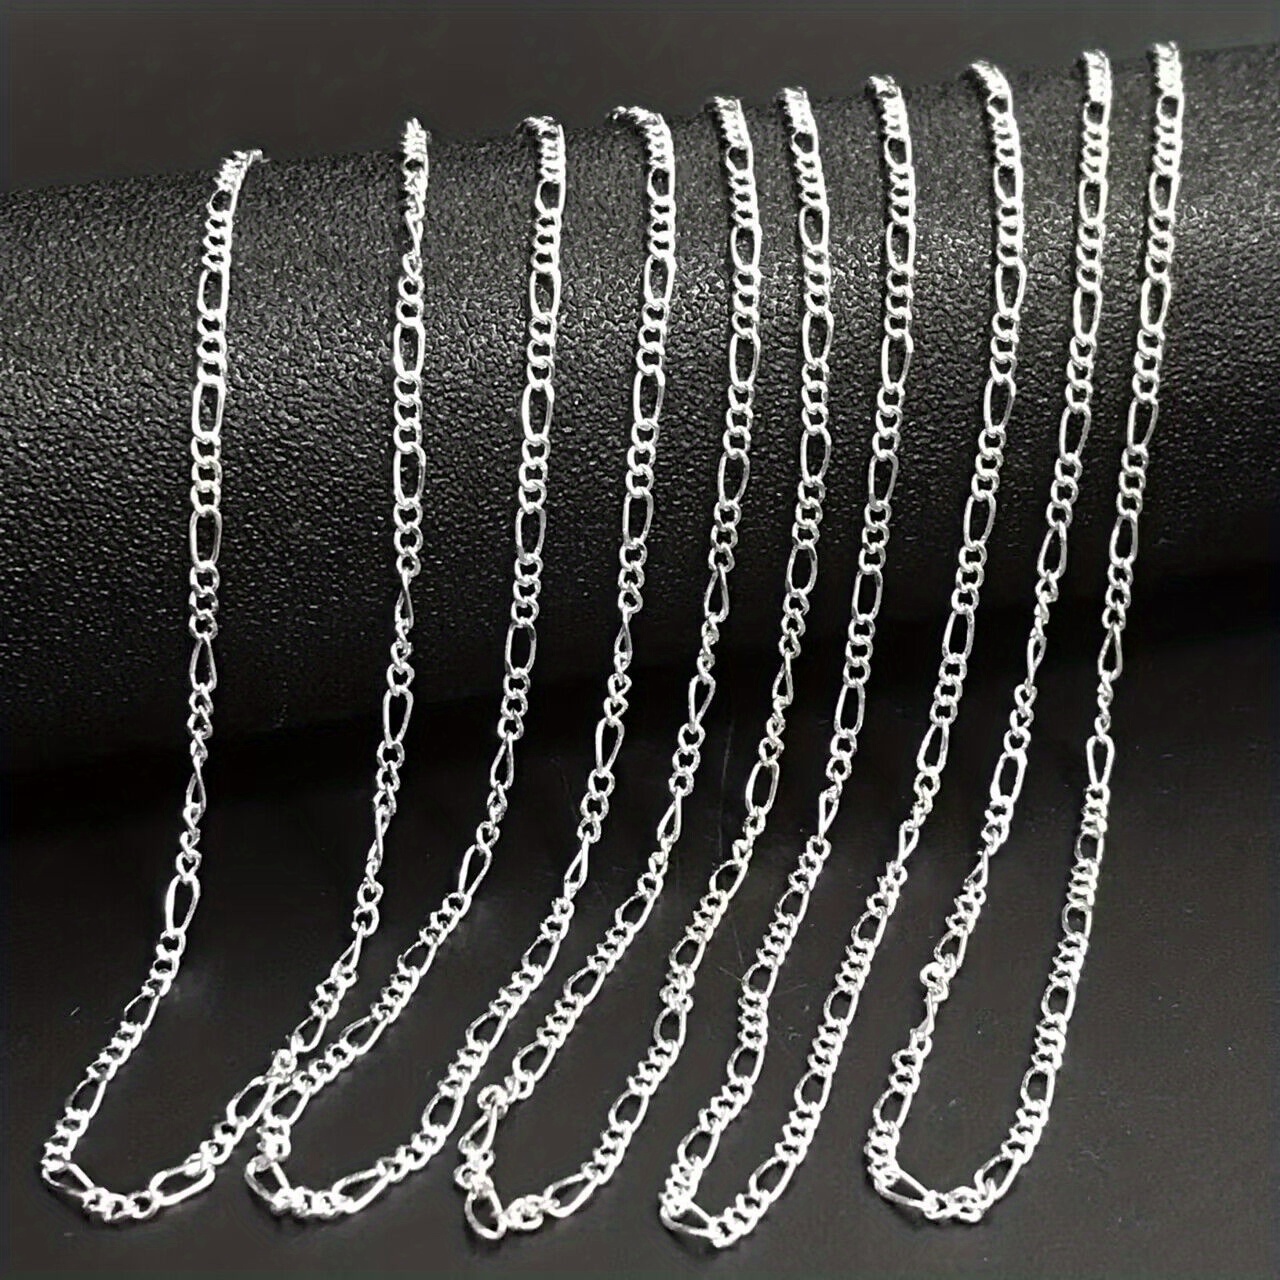 Jewelry Chains for Making Jewelry, with 1000 Jump Rings and 40 Lobster  Clasps for Jewelry Necklace and Bracelet Making